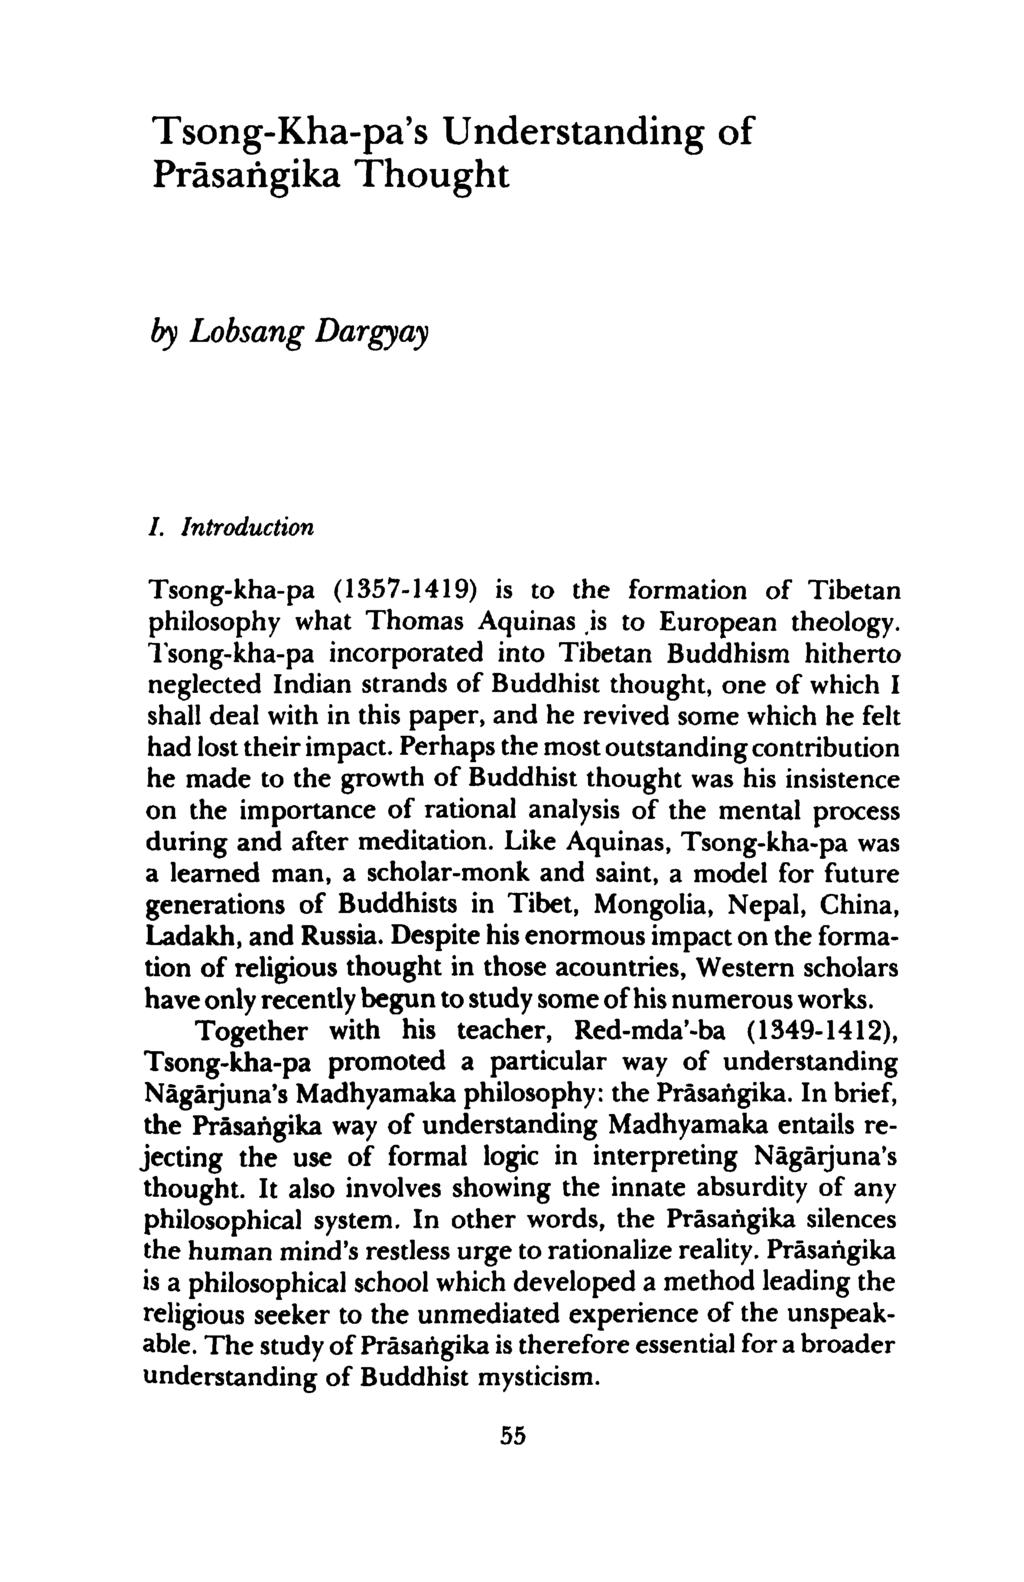 Tsong-Kha-pa's Understanding of Prasangika Thought by Lobsang Dargyay I. Introduction Tsong-kha-pa (1357-1419) is to the formation of Tibetan philosophy what Thomas Aquinas is to European theology.